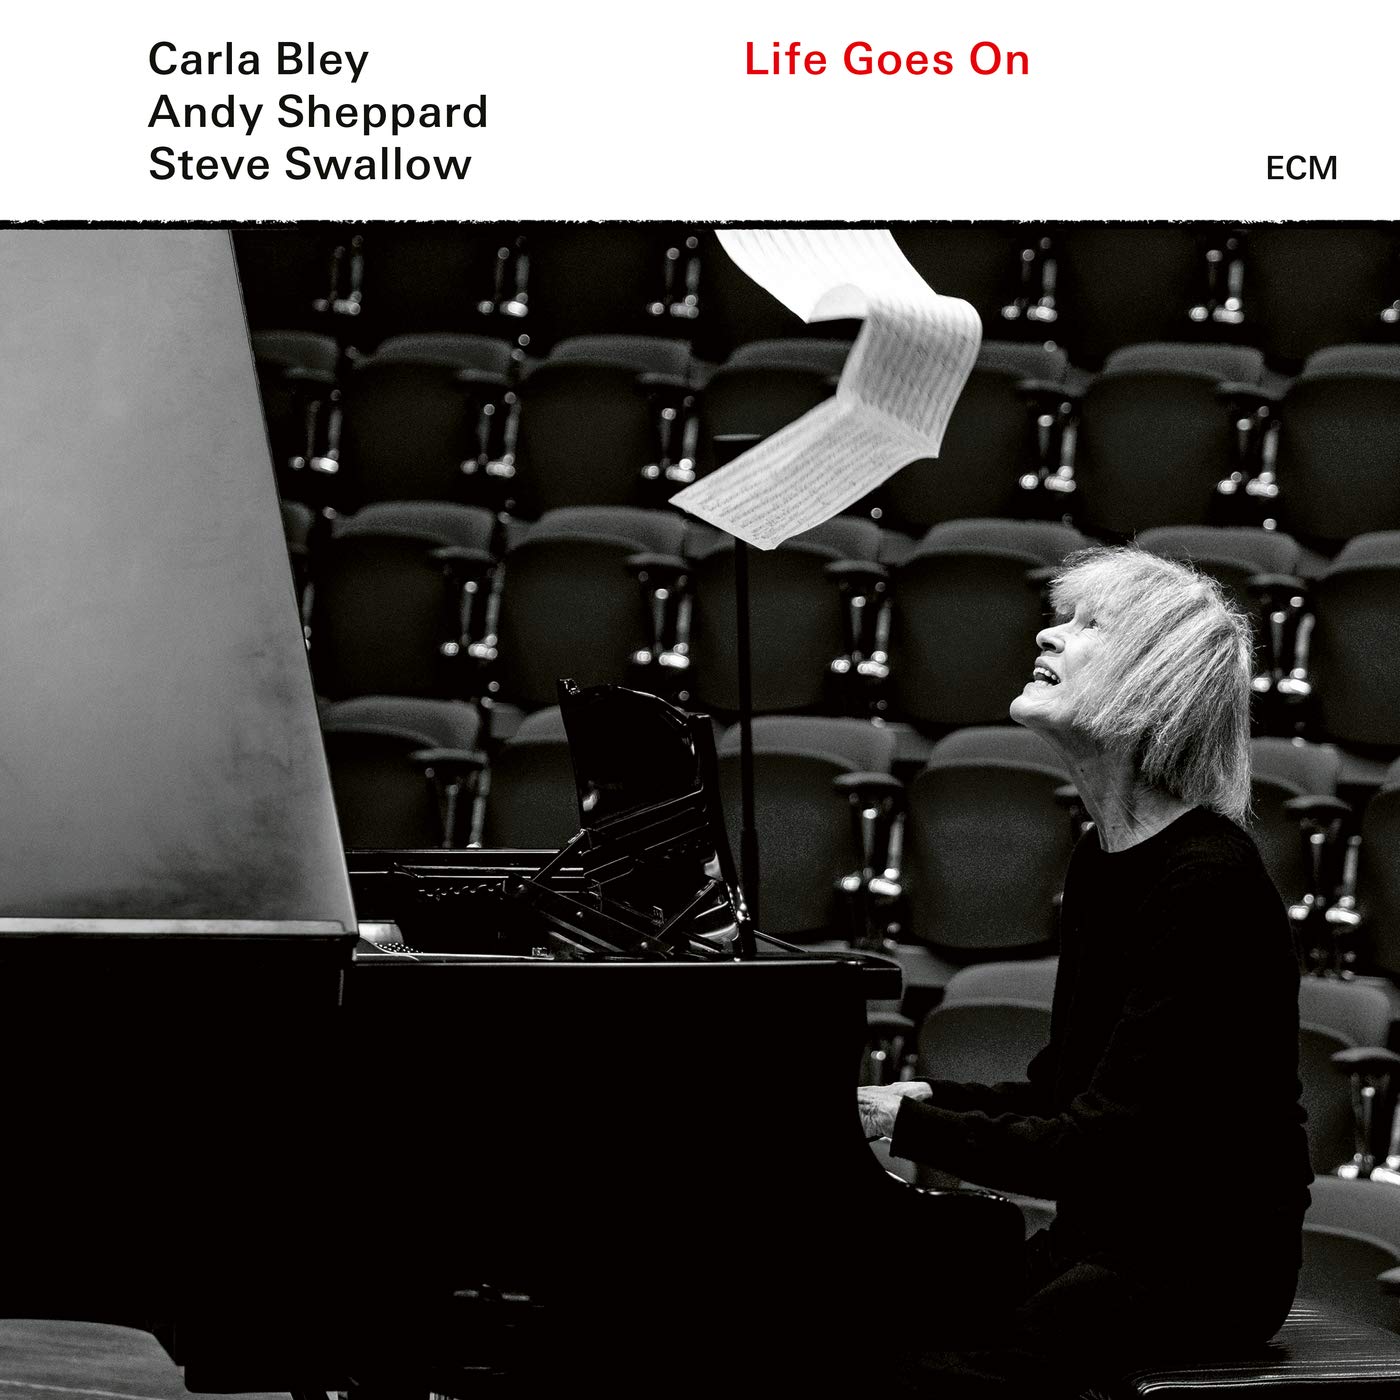 Carla Bley/Andy Sheppard/Steve Swallow: Life Goes On